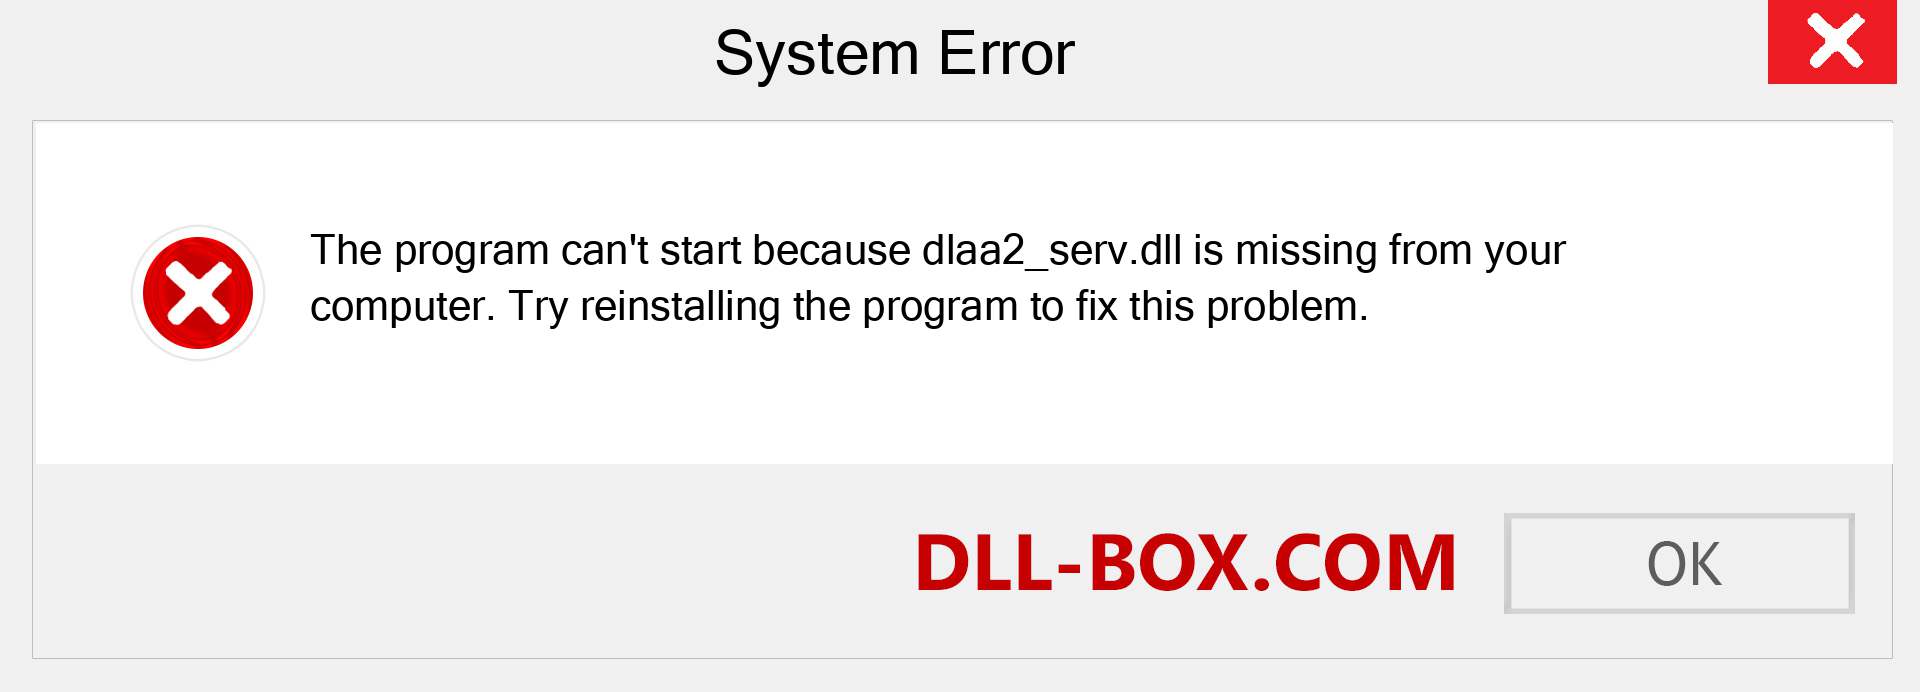  dlaa2_serv.dll file is missing?. Download for Windows 7, 8, 10 - Fix  dlaa2_serv dll Missing Error on Windows, photos, images